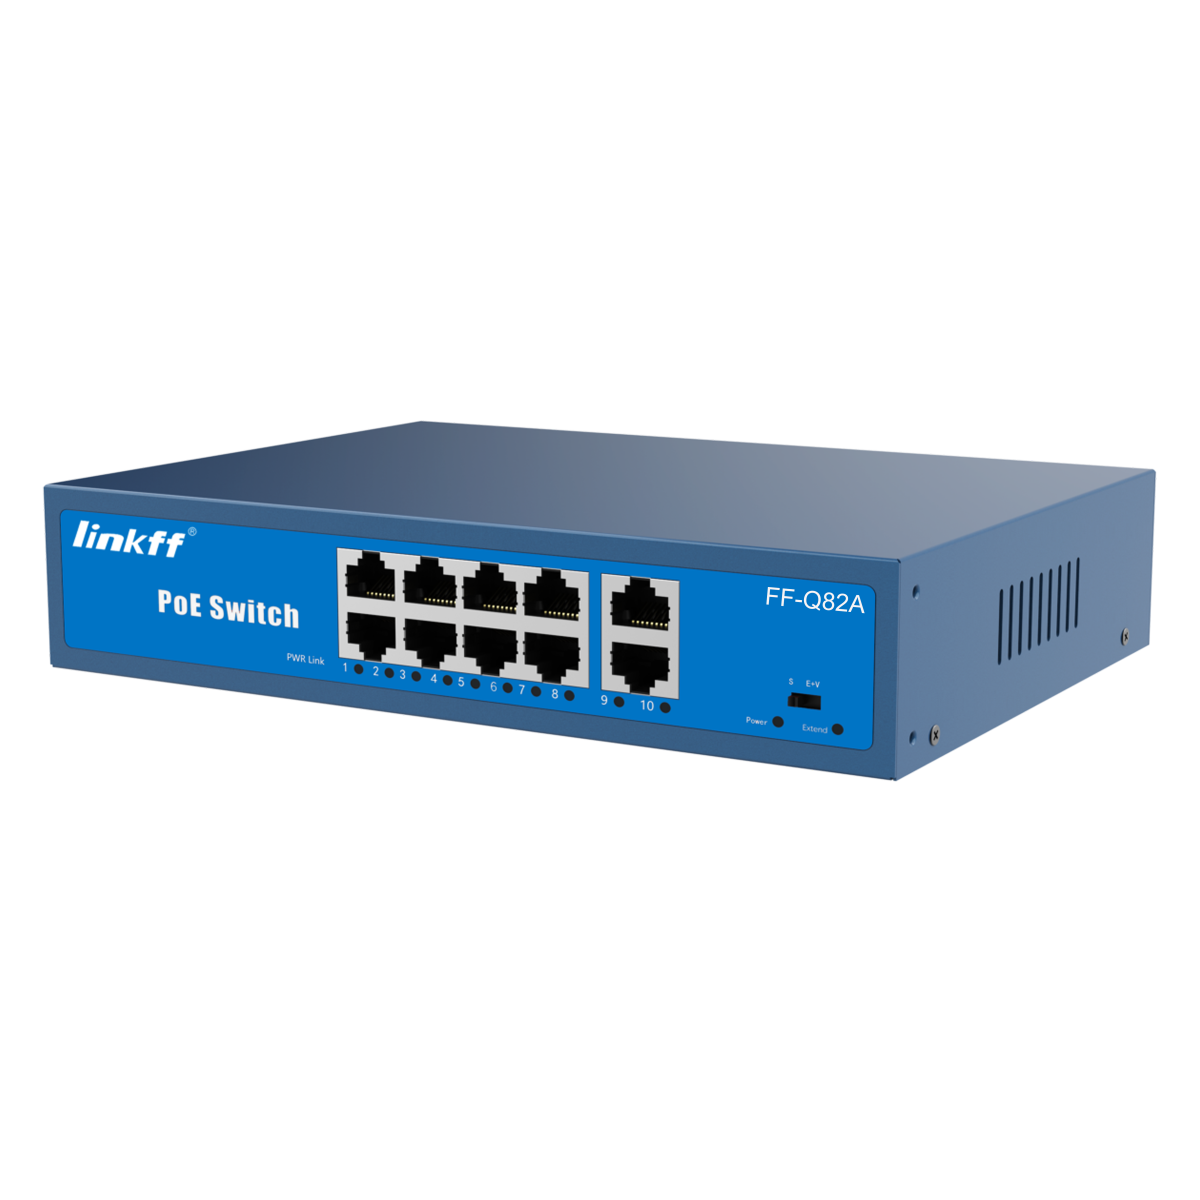 Linkff FF-Q82A 8FE+2GE PoE Switch 10/100/1000Mbps